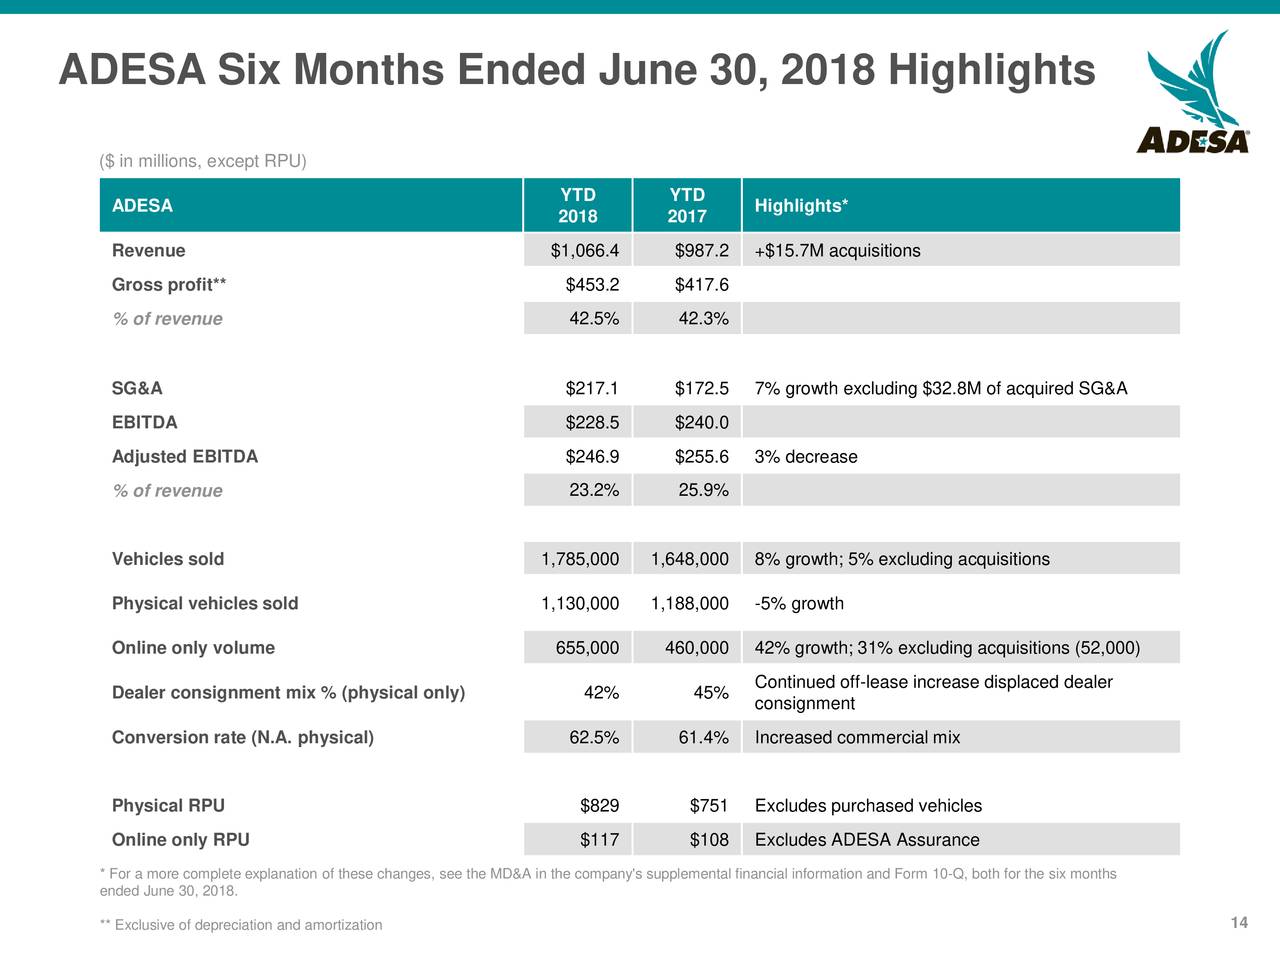 ADESA Six Months Ended June 30, 2018 Highlights